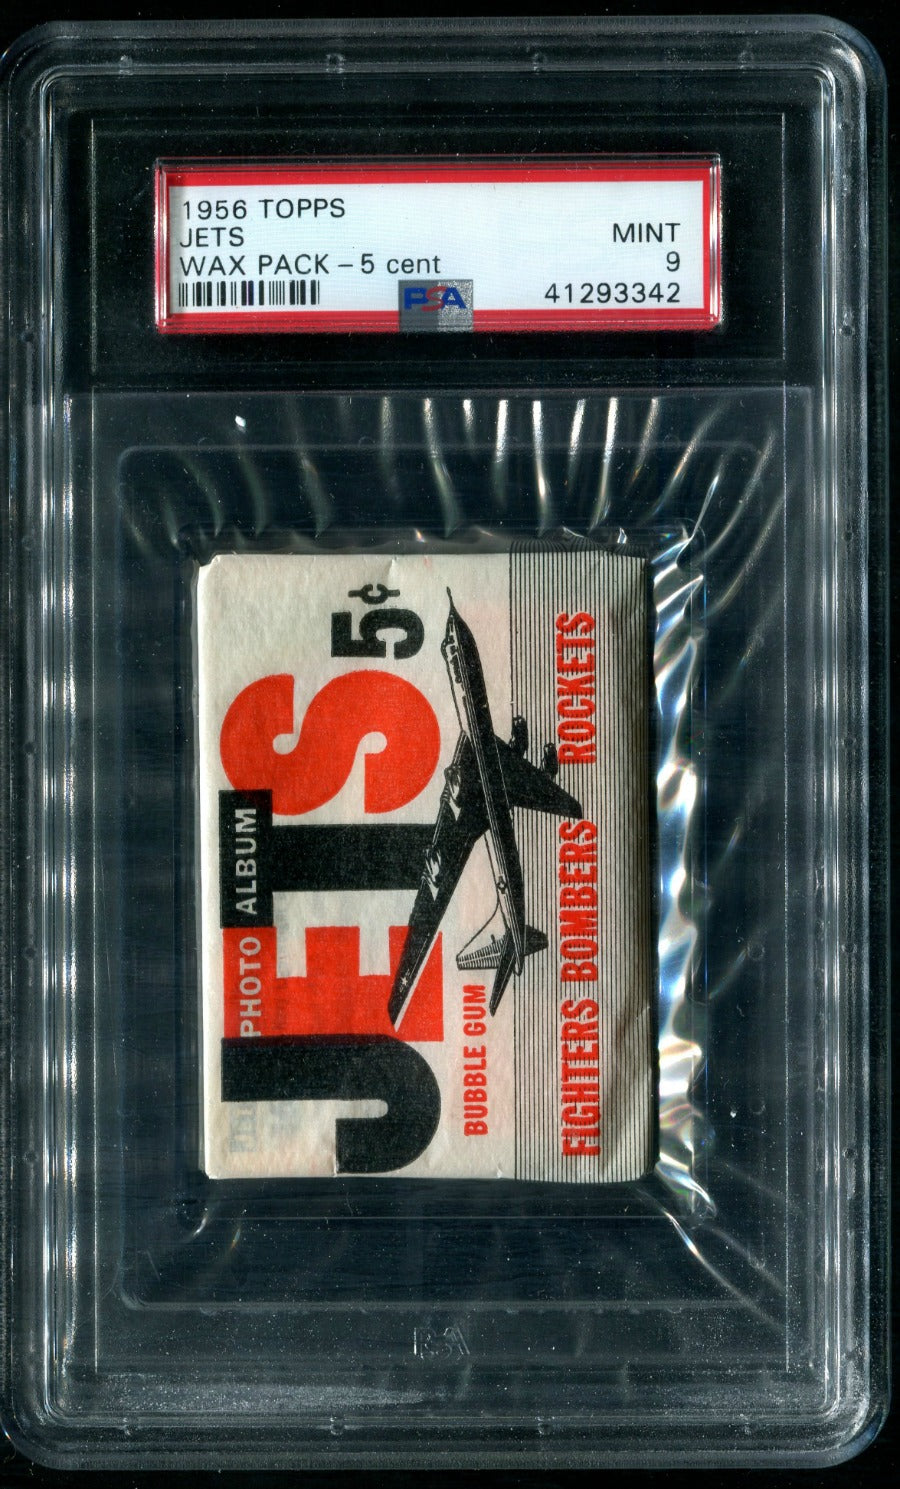 1956 Topps Jets Unopened 5 Cent Wax Pack PSA 9